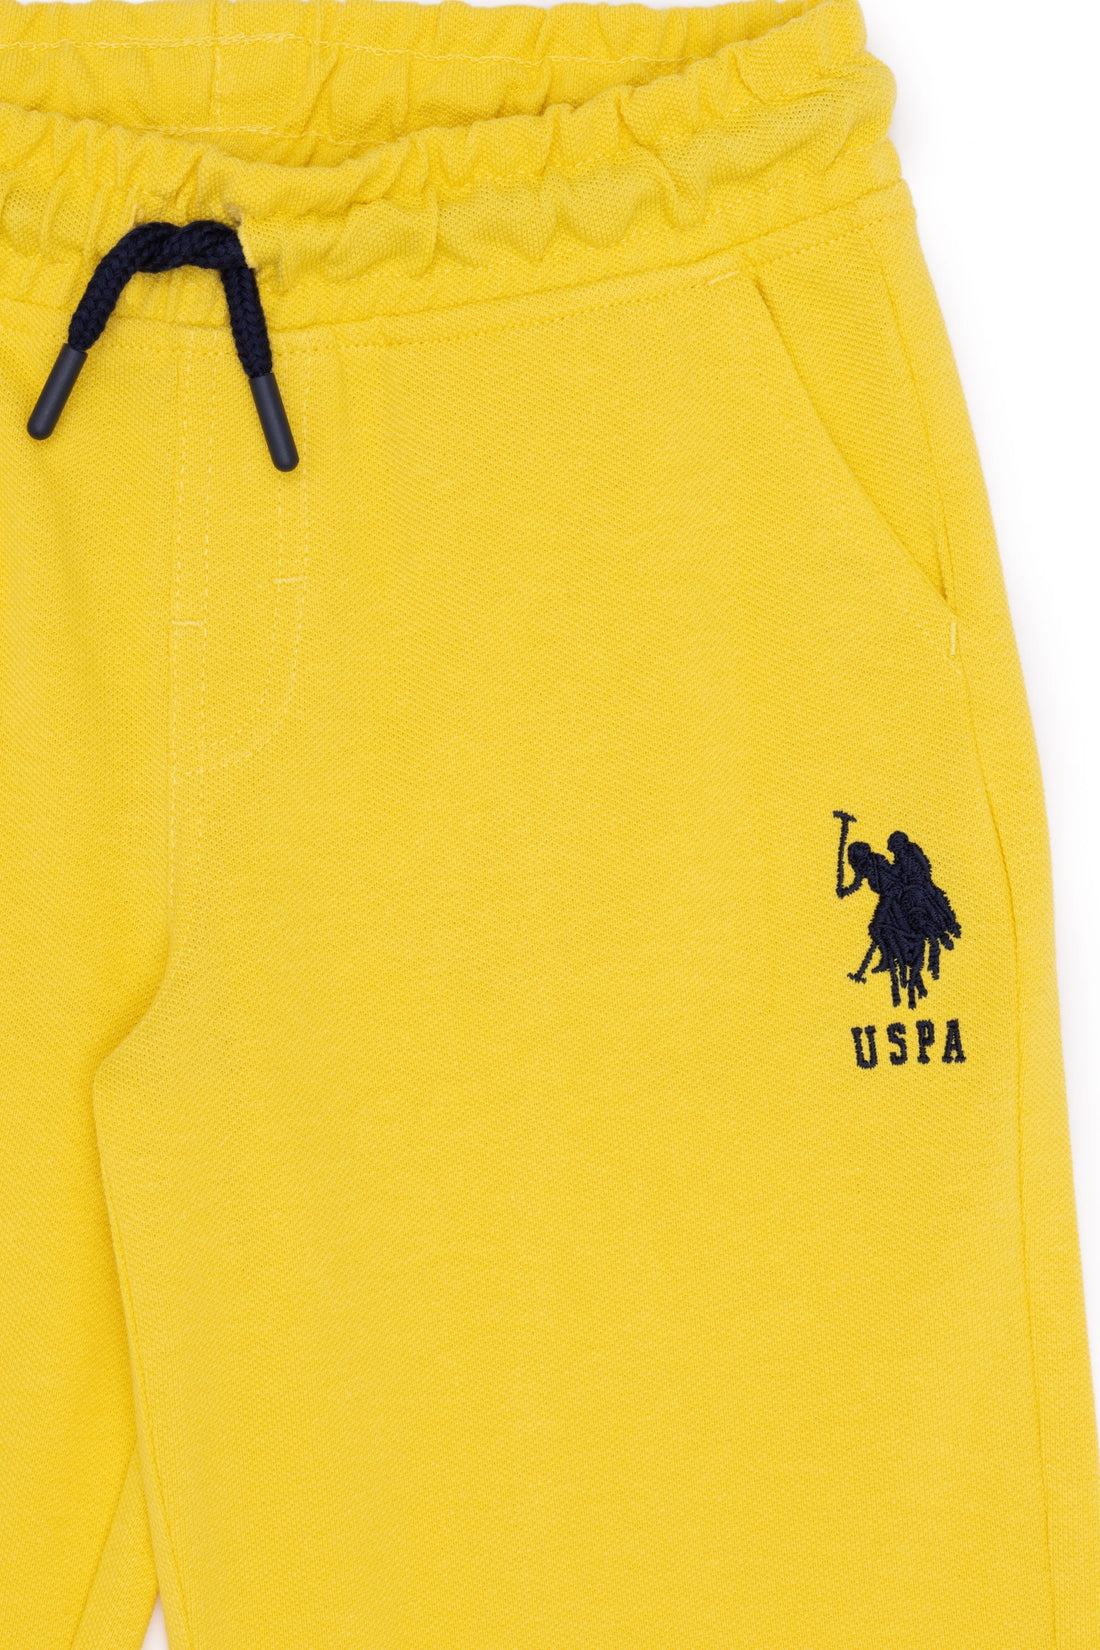 Yellow Knitted Shorts With Black Drawstrings